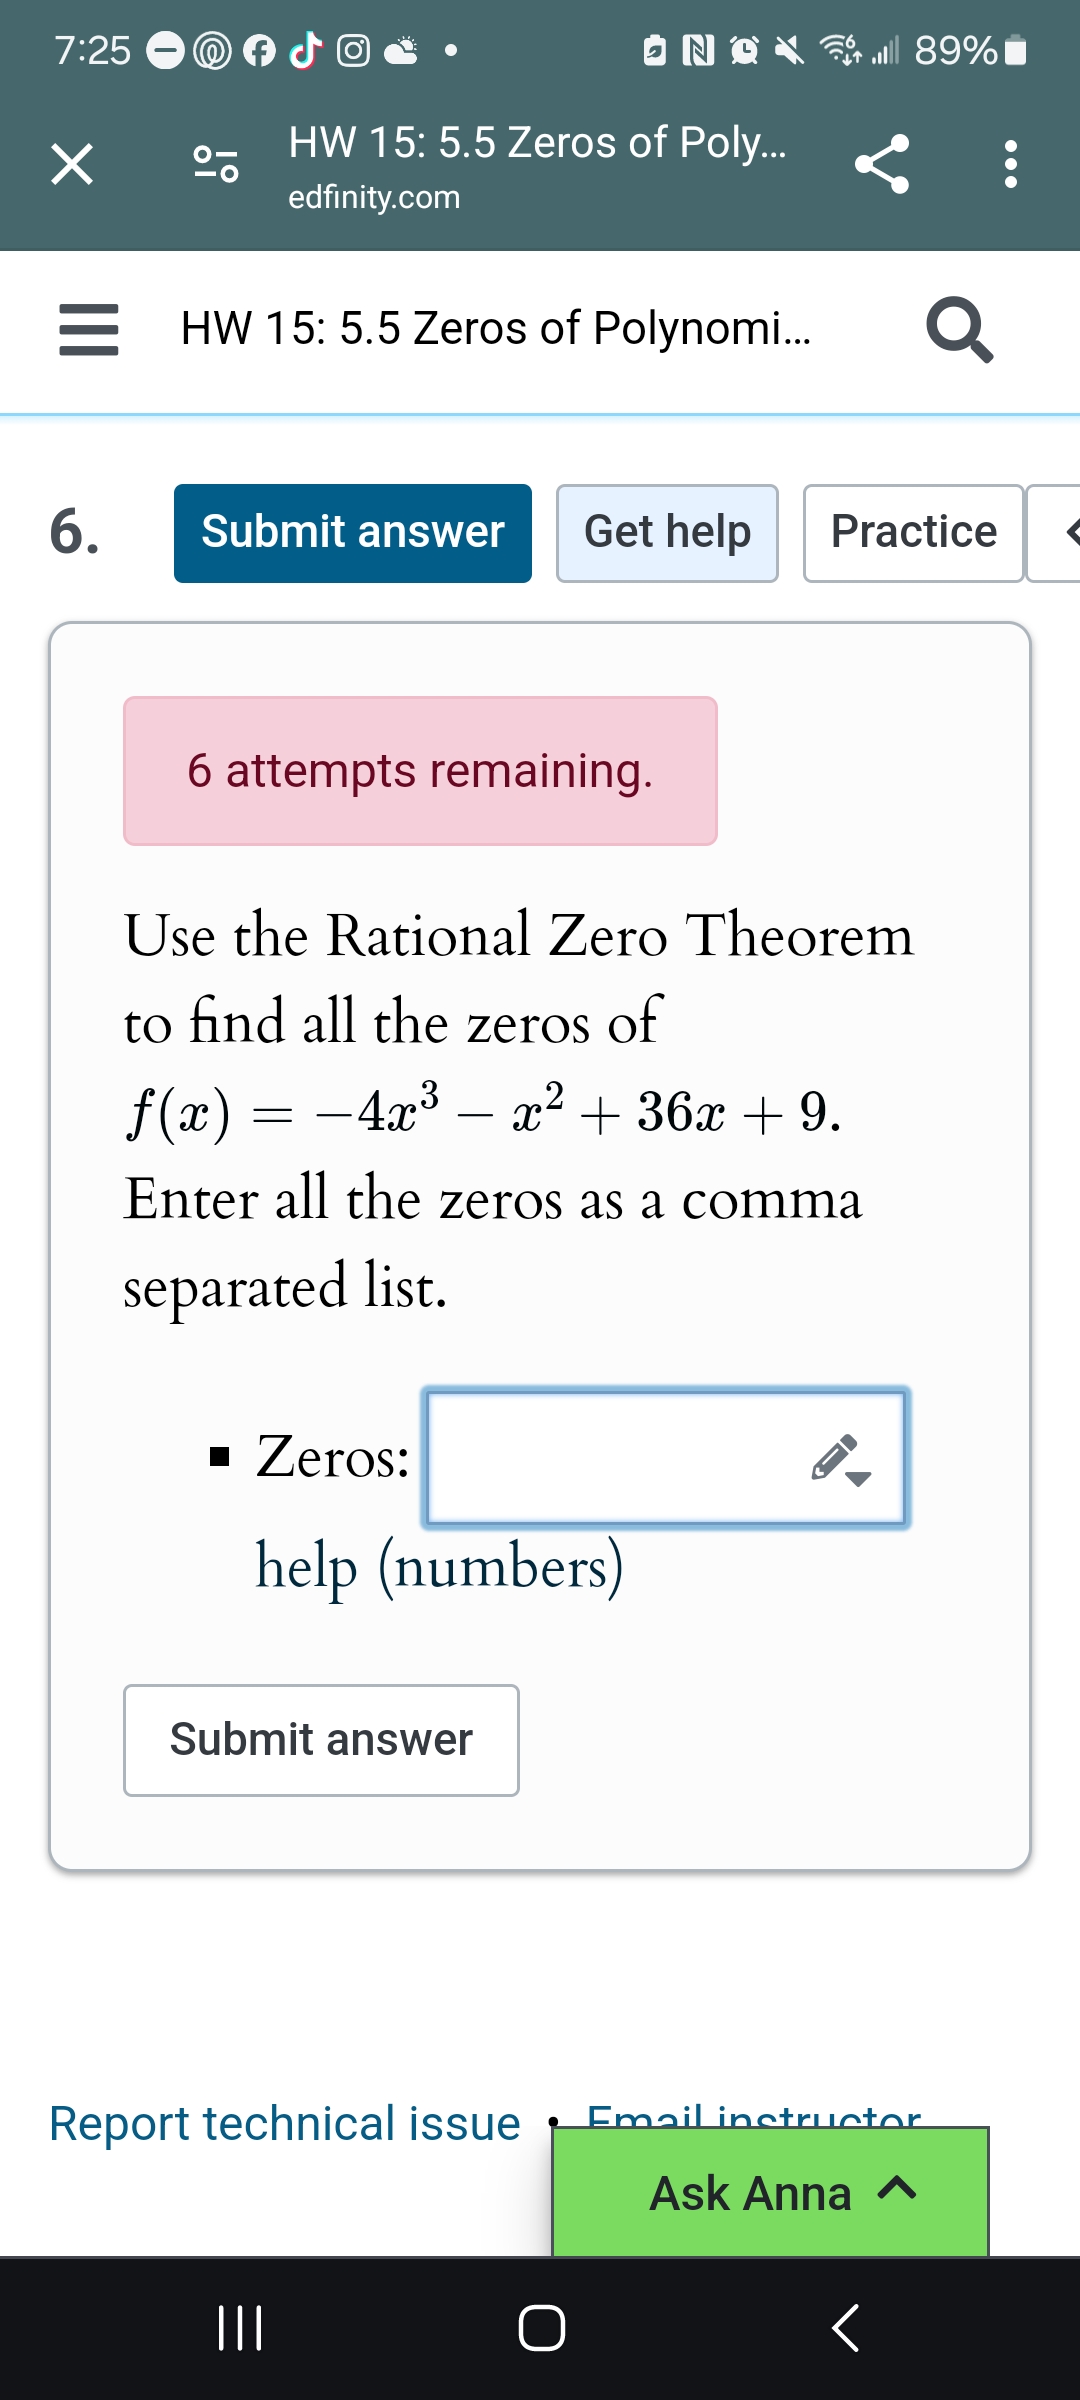 7:25
°
HW 15: 5.5 Zeros of Poly...
edfinity.com
HW 15: 5.5 Zeros of Polynomi...
ll 89%
૦
Submit answer
Get help
Practice
6.
6 attempts remaining.
Use the Rational Zero Theorem
to find all the zeros of
f(x) = −4x³- x² + 36x + 9.
Enter all the zeros as a comma
separated list.
▪ Zeros:
help (numbers)
ས
Submit answer
Report technical issue
Email instructor
Ask Anna ^
|||